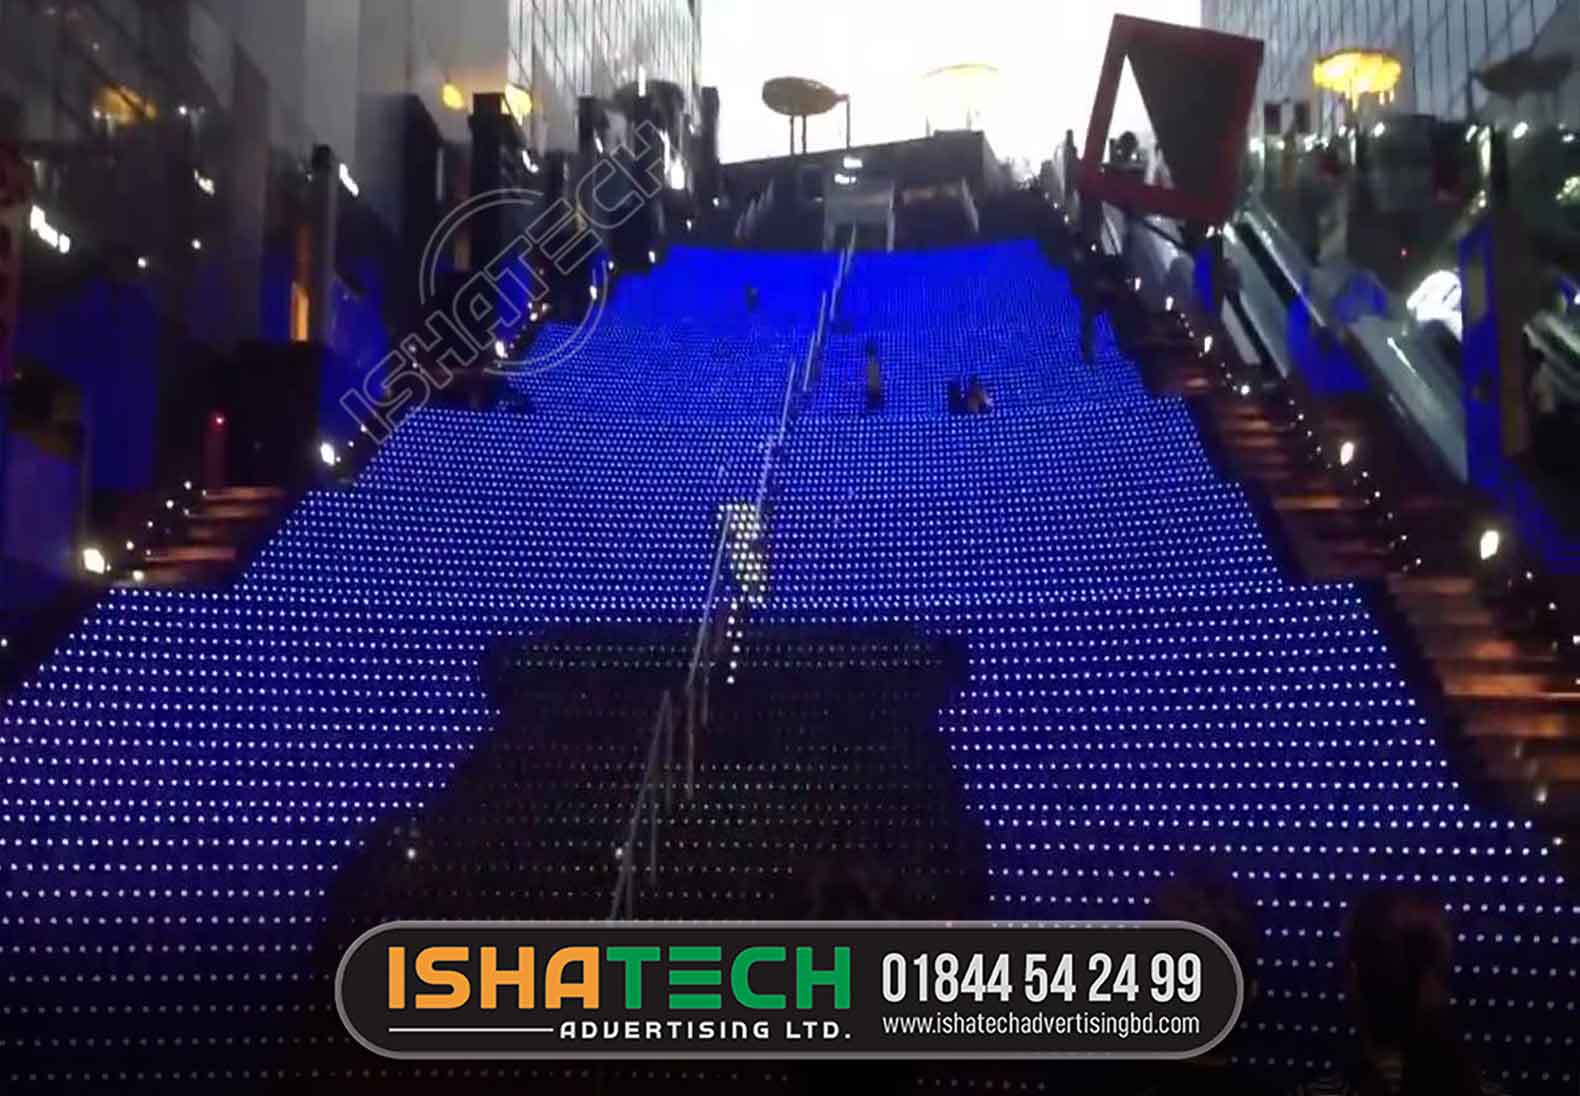 Stair LED Display, Stair LED display is specially designed for stages, bars, shopping malls and other public places. High refresh rate and high grayscale make it more vivid, meeting the requirements of high visual quality of commercial use. Stair LED screen adopts toughened glass design featuring high load bearing capacity and shock resistance. LED staircase can bear the weight of up to 1.5 T every square meter. According to customers’ requirements and field environment, Shenzhen Apexls Optoelectronic is capable of providing the most appropriate stair LED display.